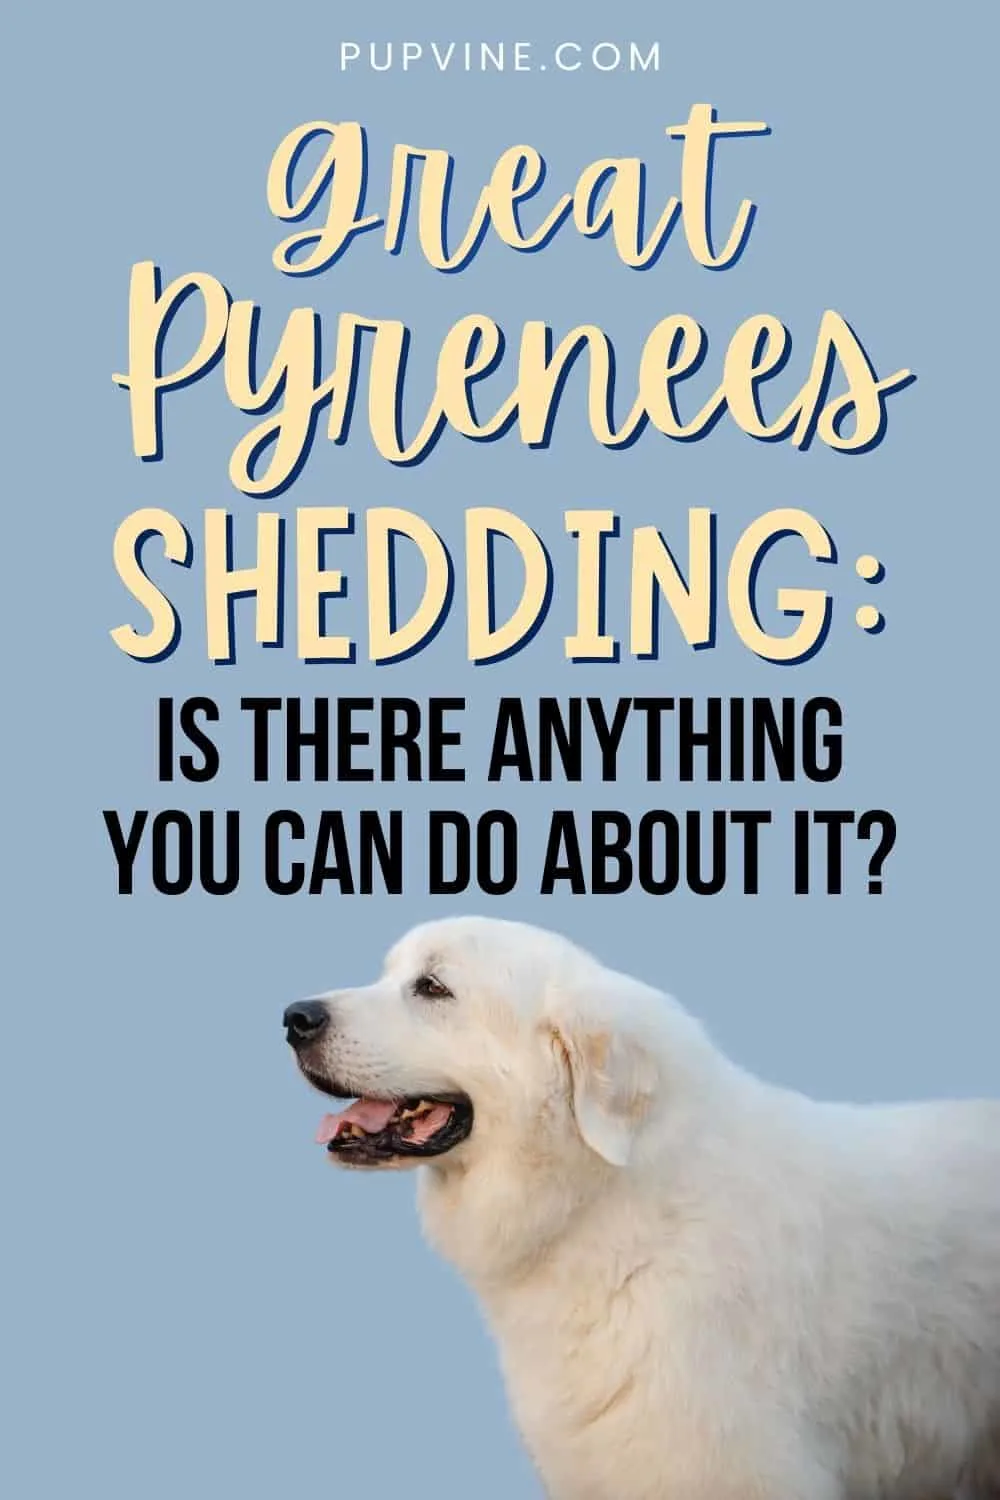 Great Pyrenees Shedding: Is There Anything You Can Do About It?